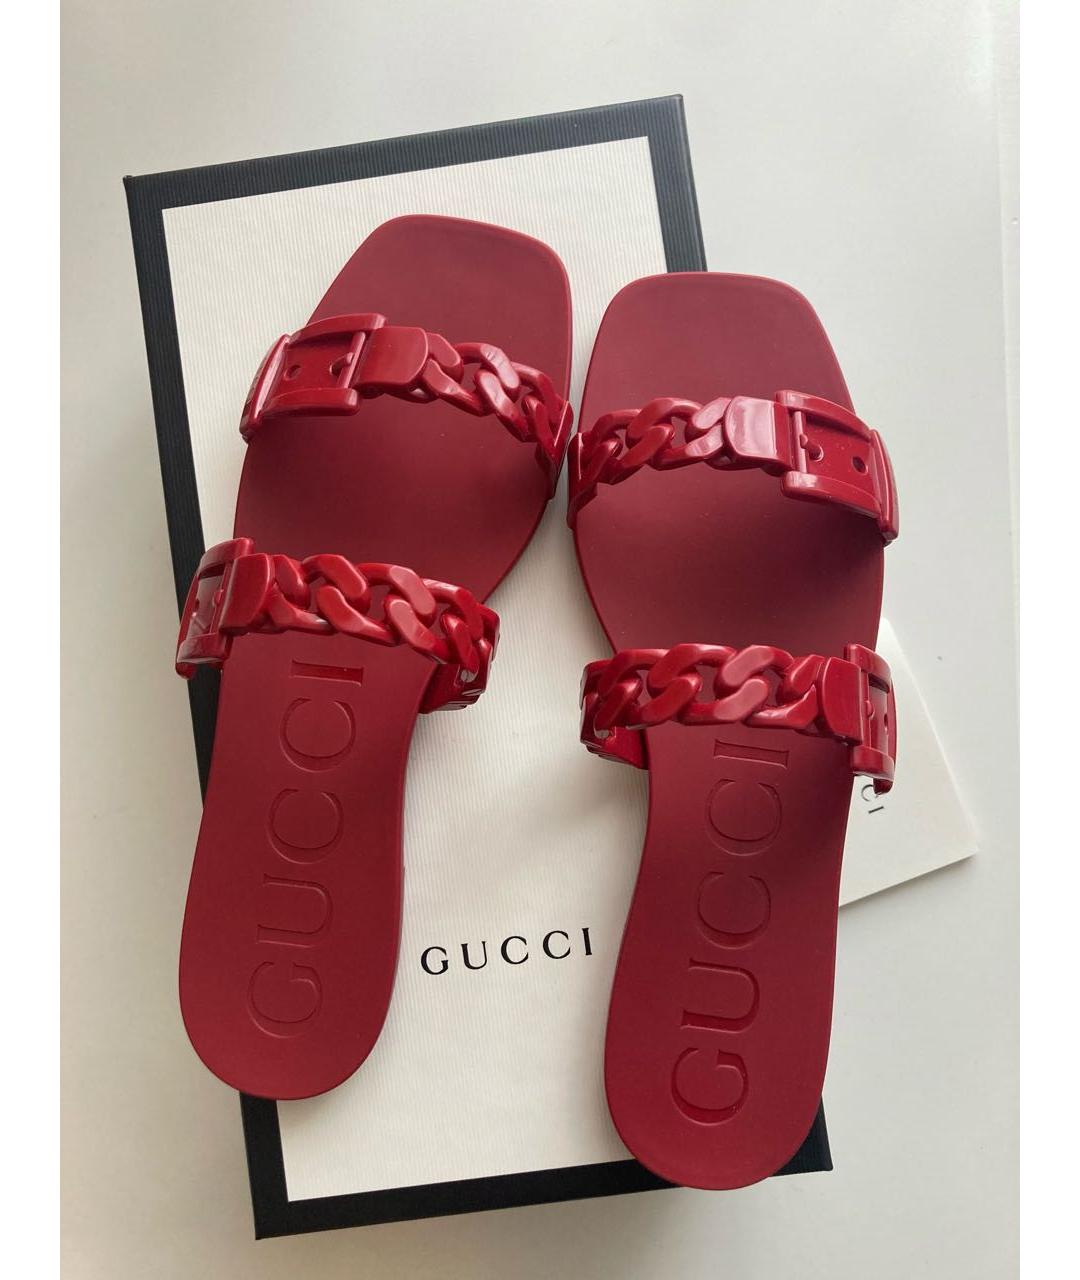 GUCCI Бордовые шлепанцы, фото 2